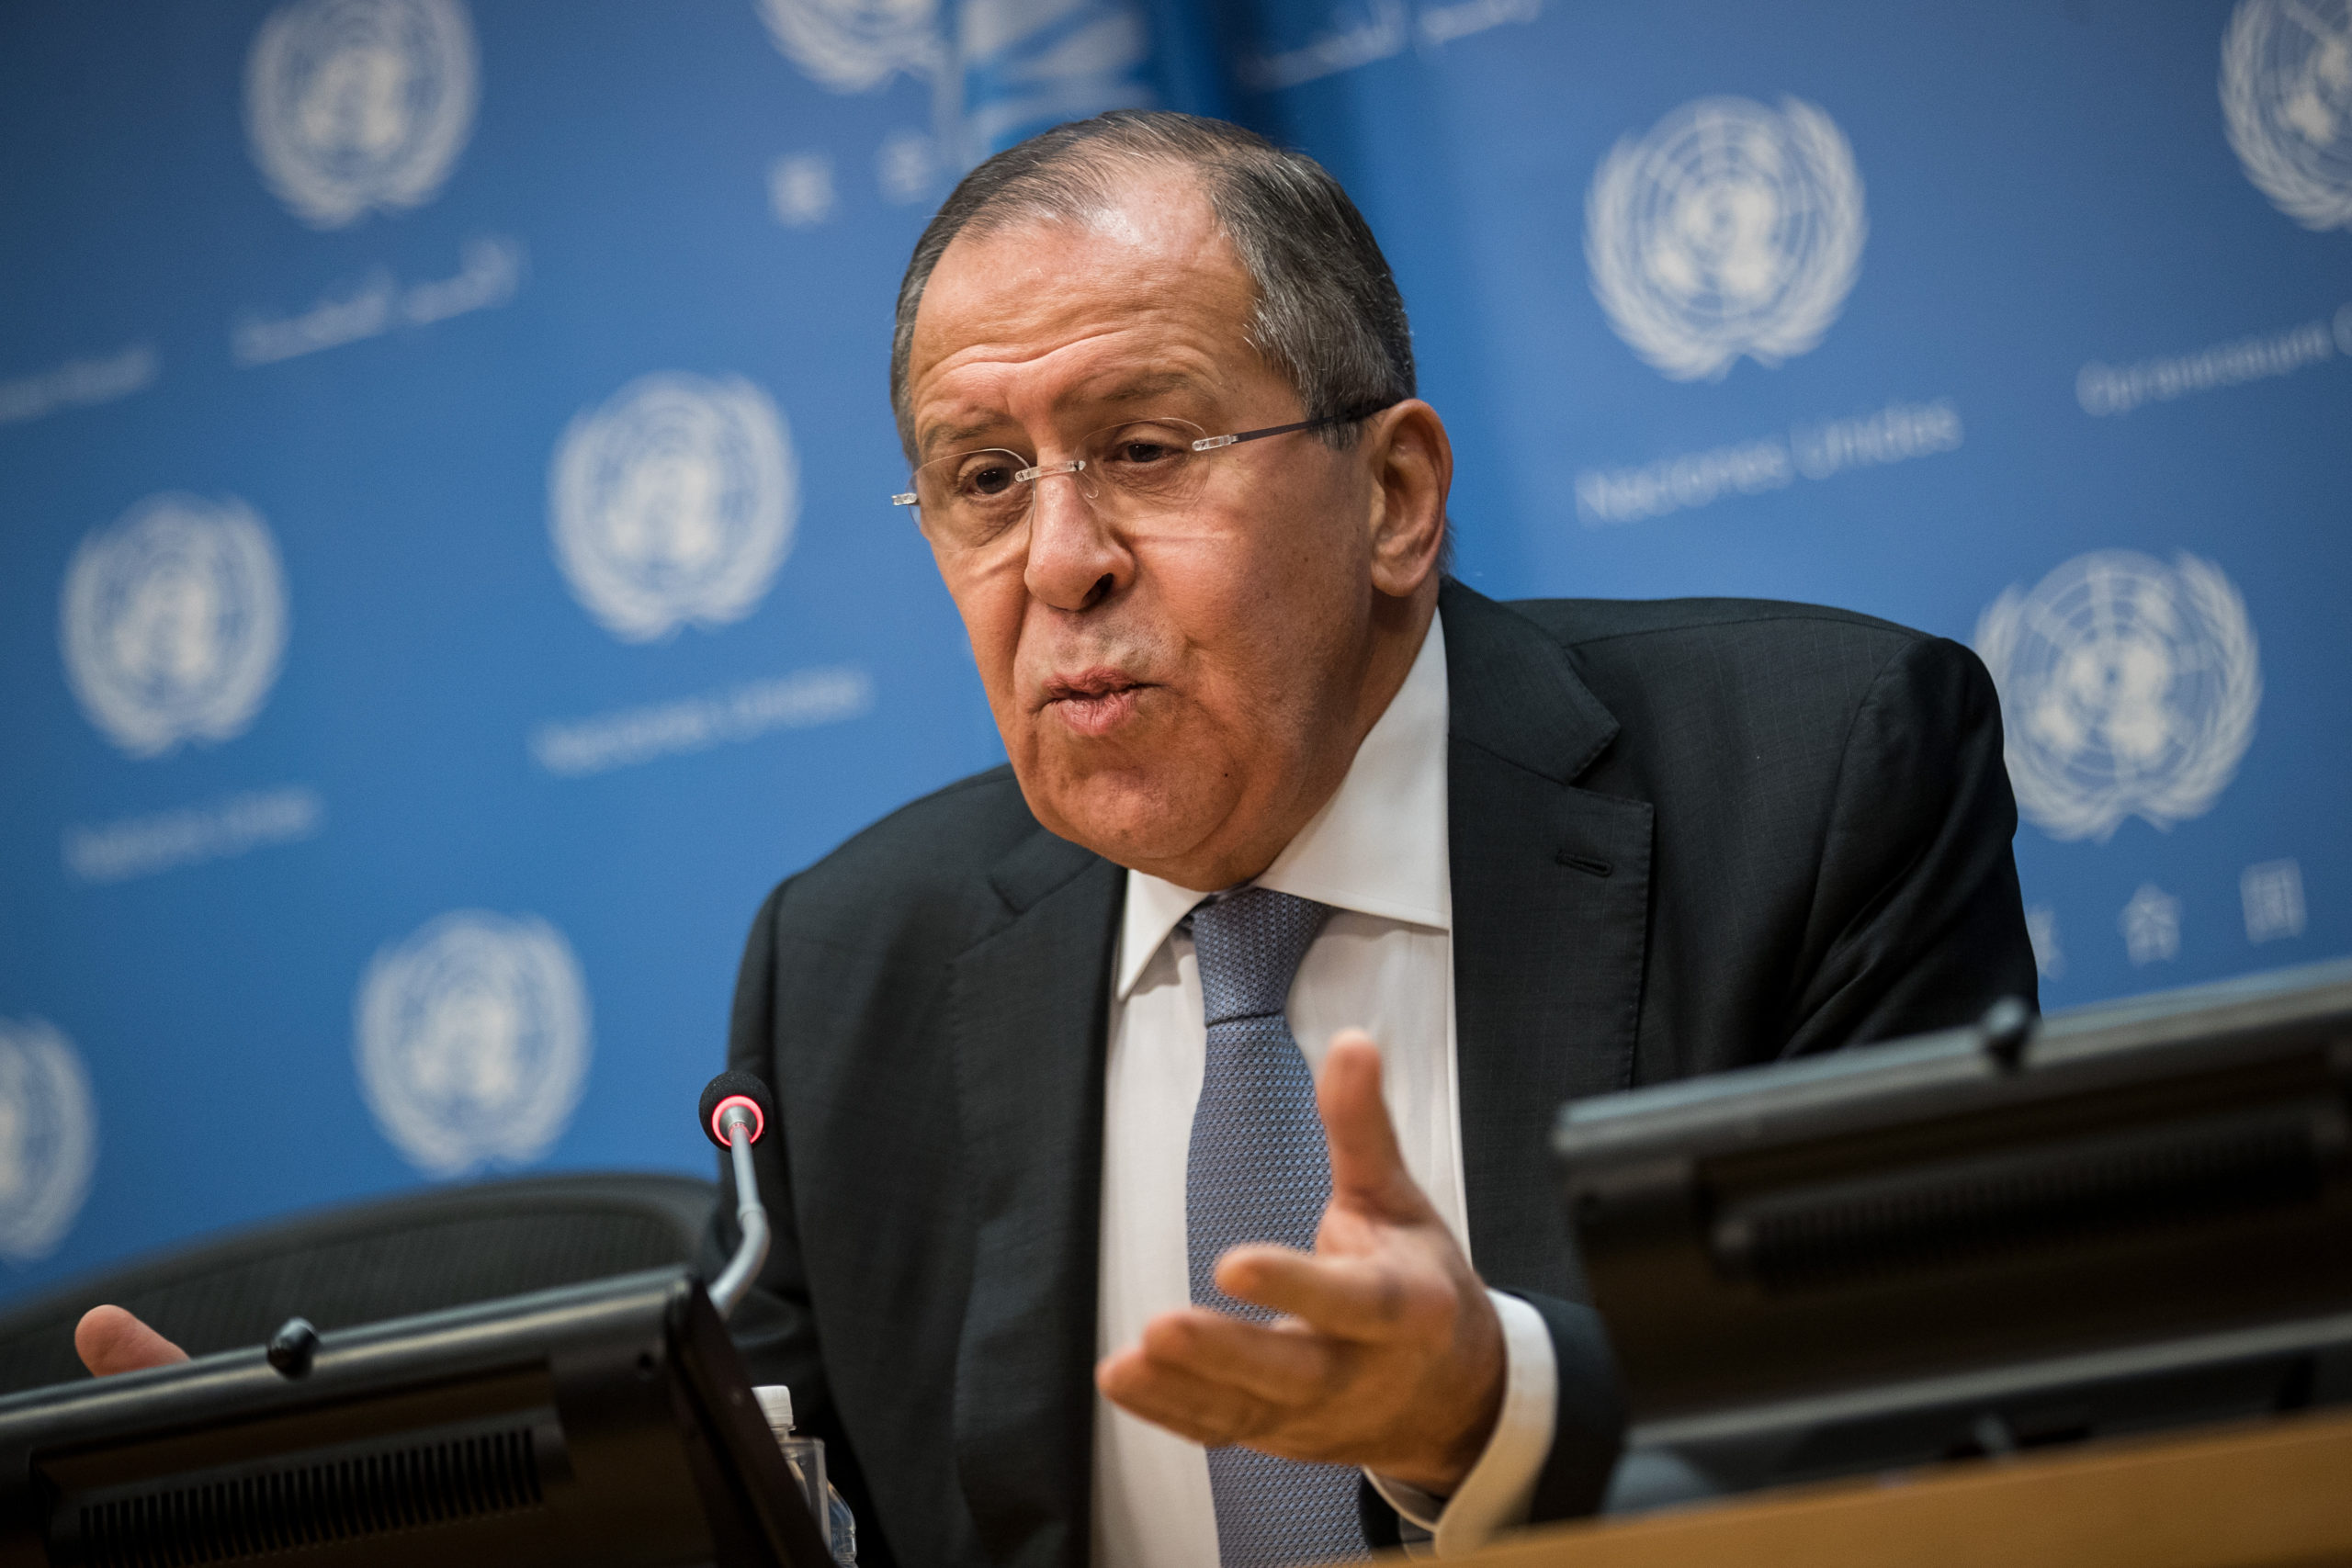 Russian Foreign Minister Sergey Lavrov Holds Press Briefing At U.N.